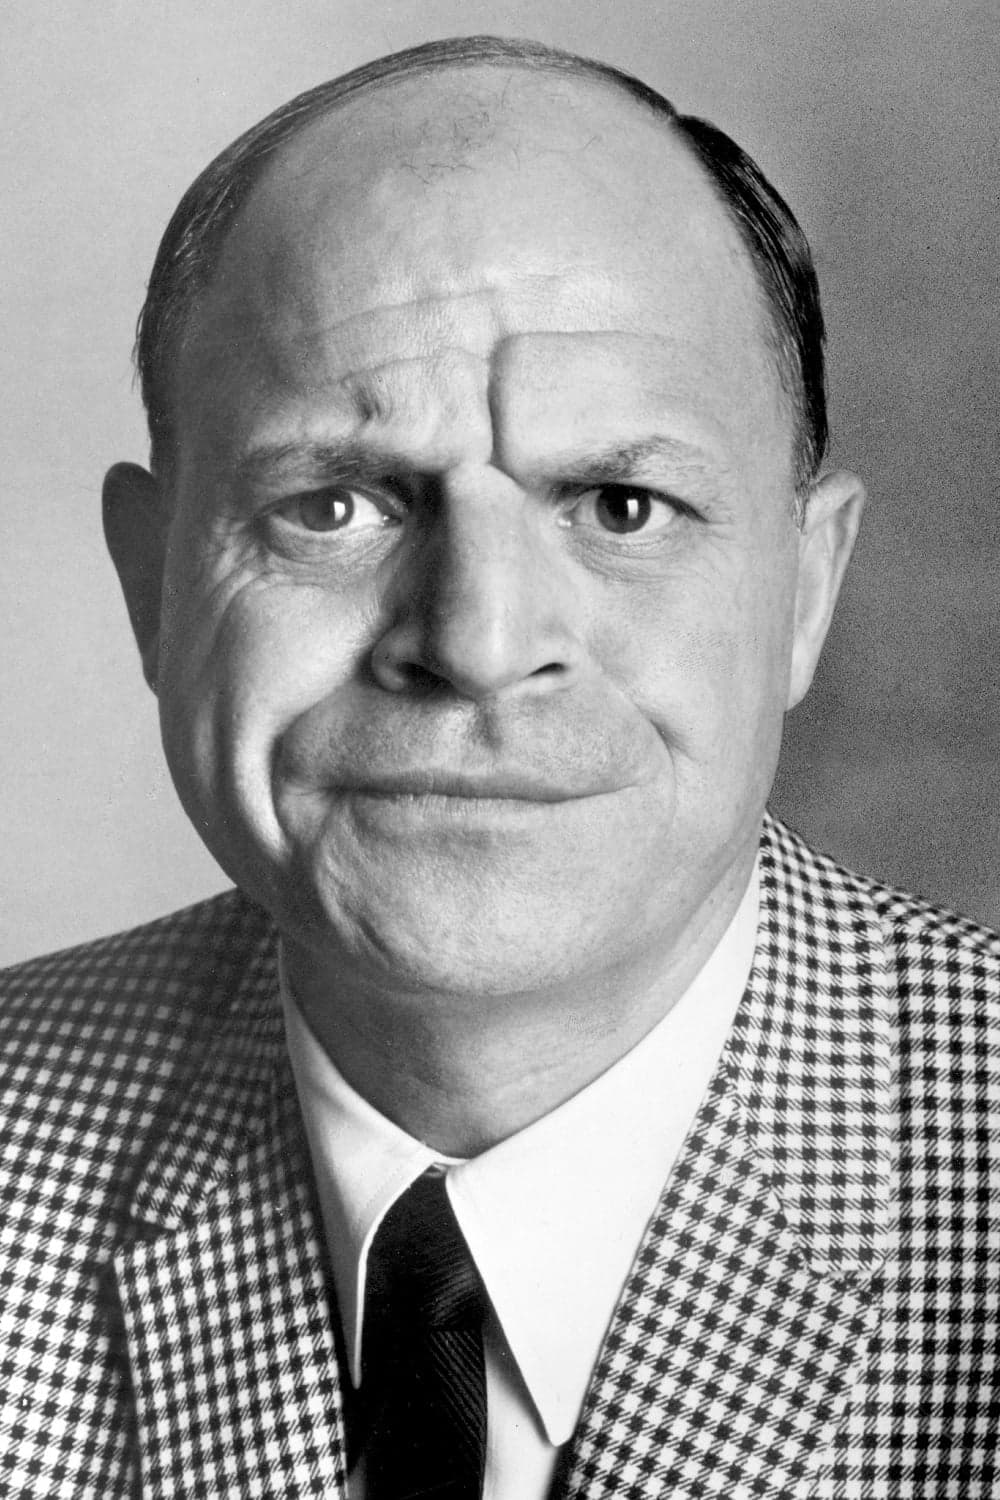 Don Rickles | Staff Sergeant "Crapgame"